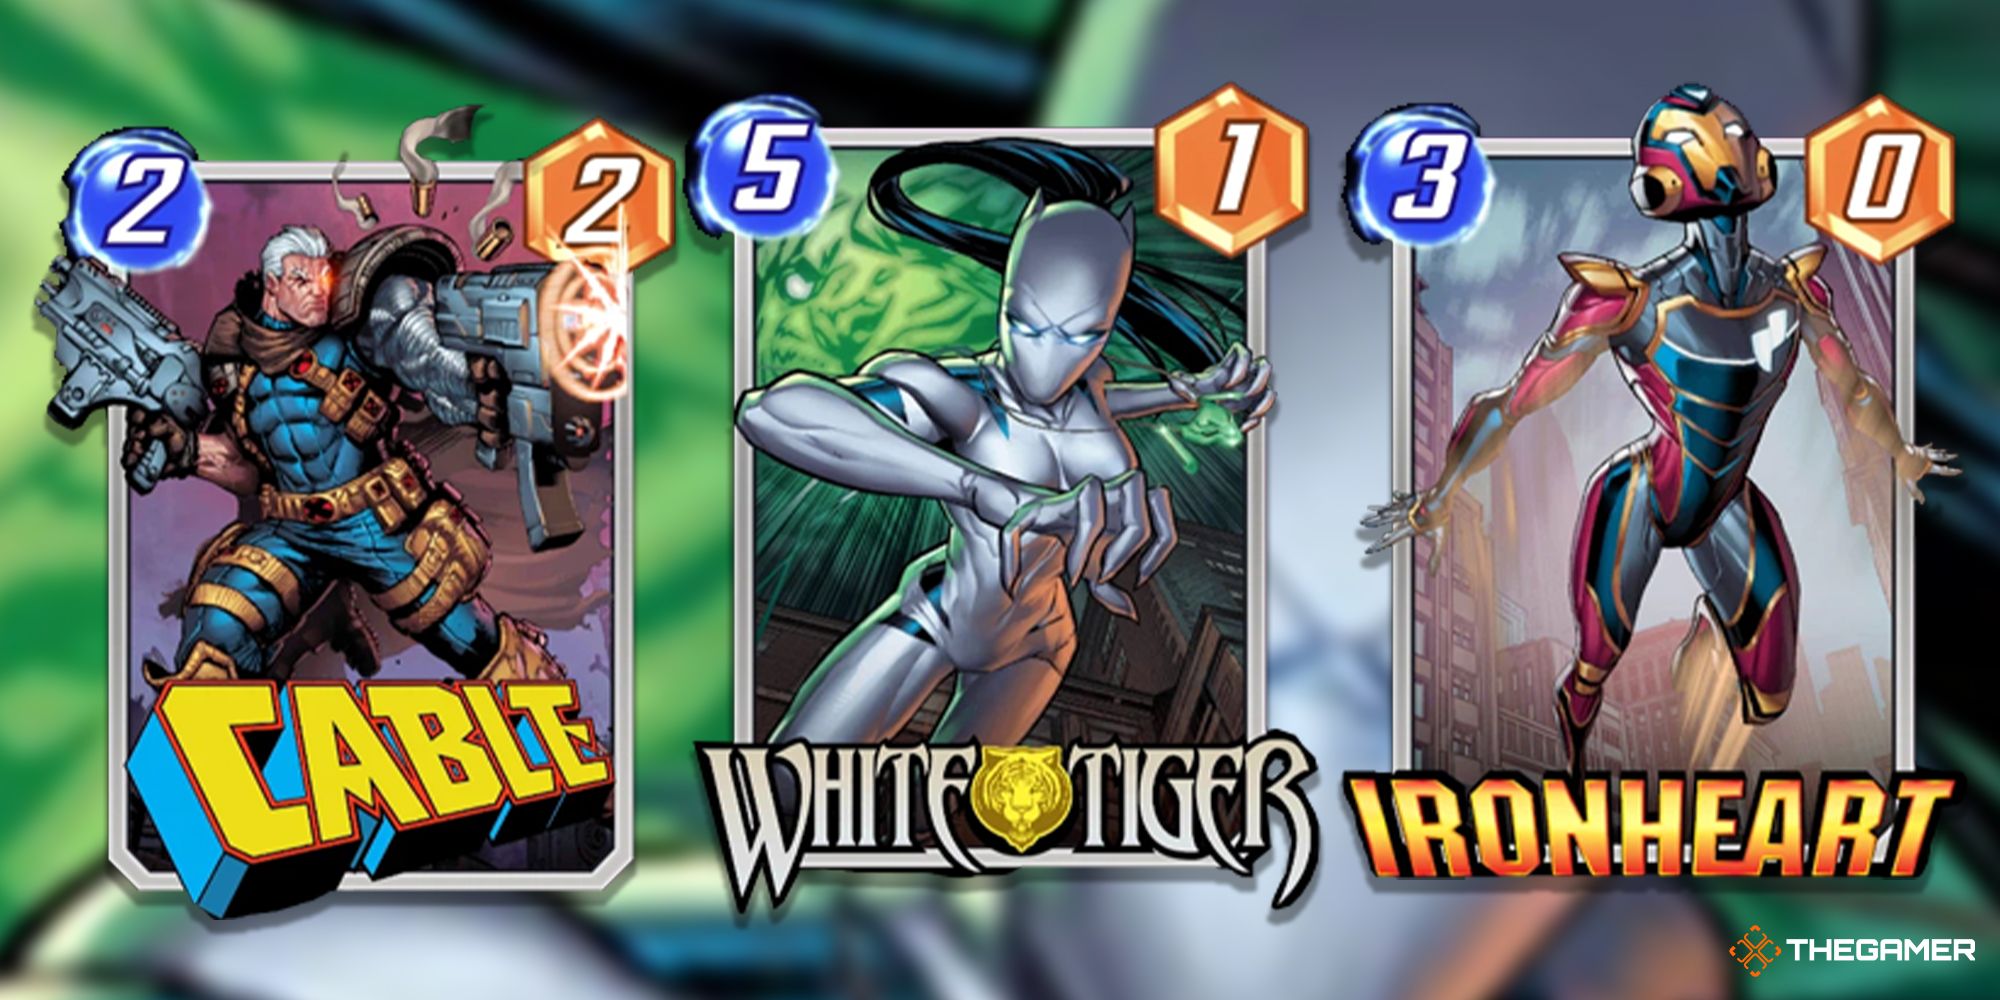 Cable White Tiger and Ironheart cards in Marvel Snap